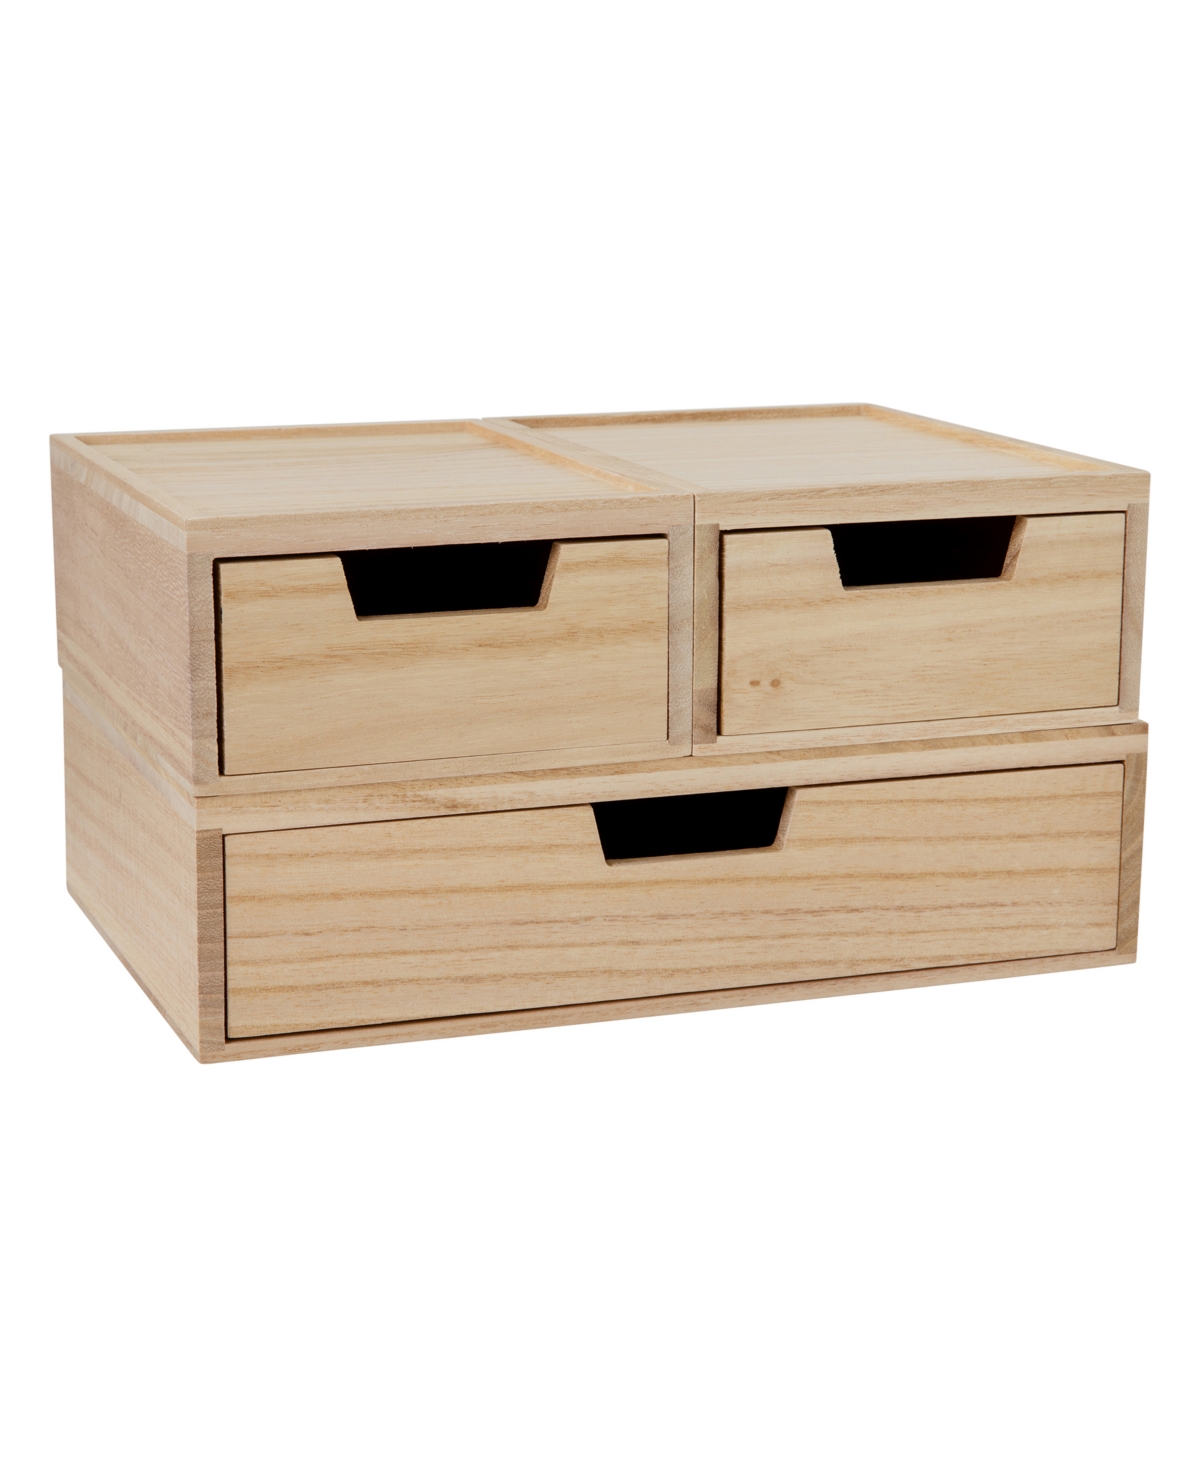 Martha Stewart Weston Stackable Paulownia Wood Boxes With Drawers, Office Desktop Organizers, 3 Compartments In Light Natural